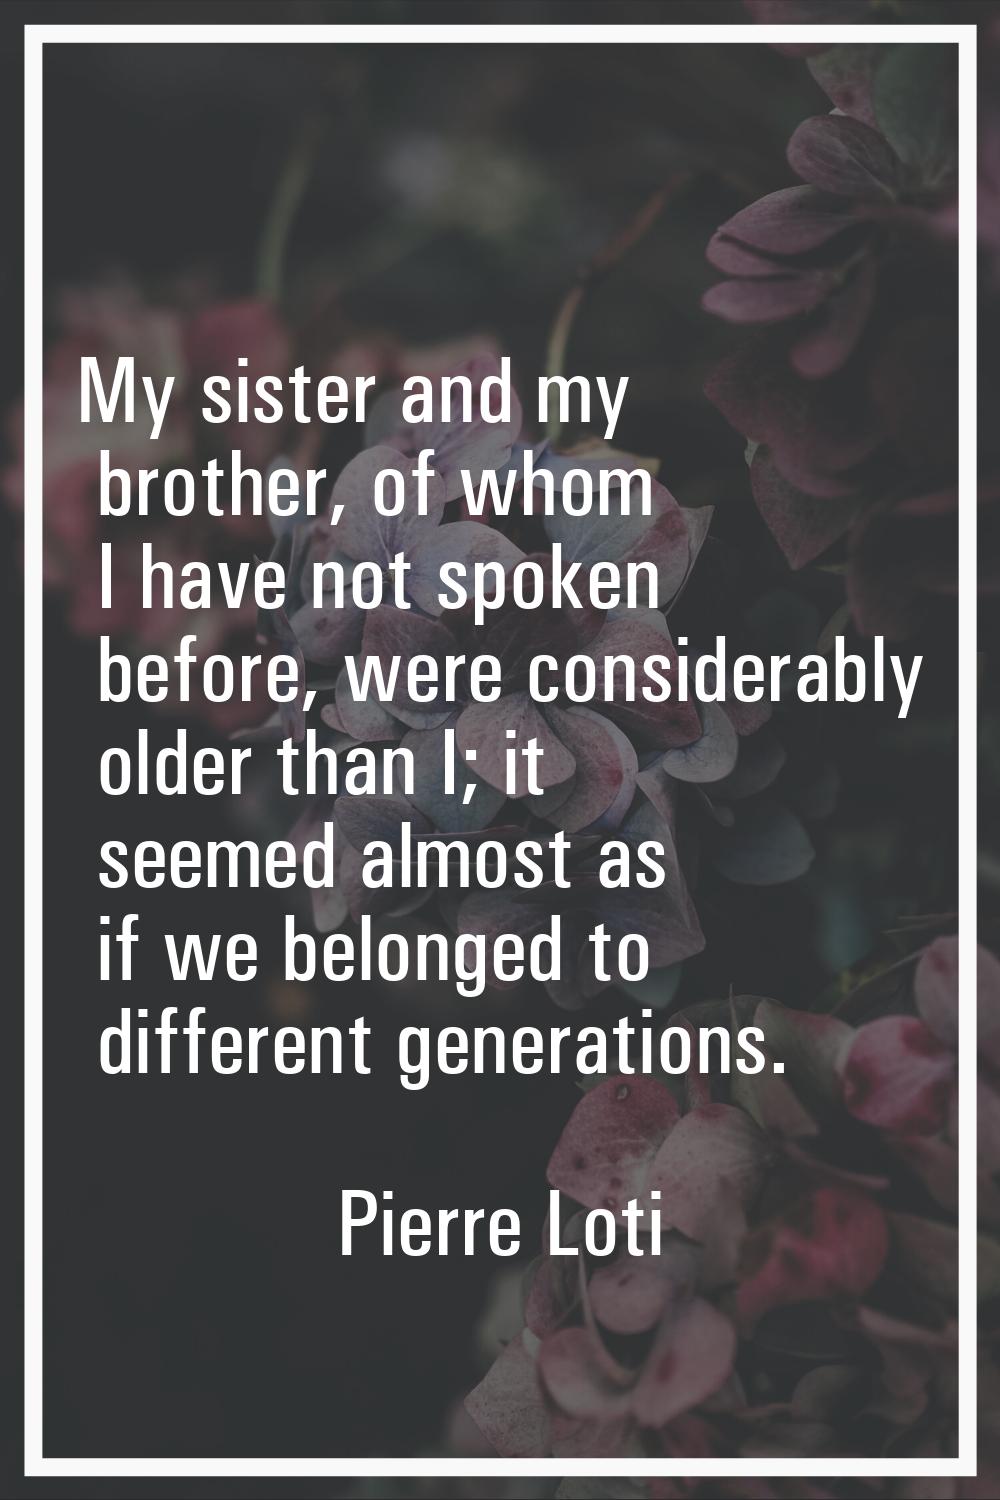 My sister and my brother, of whom I have not spoken before, were considerably older than I; it seem